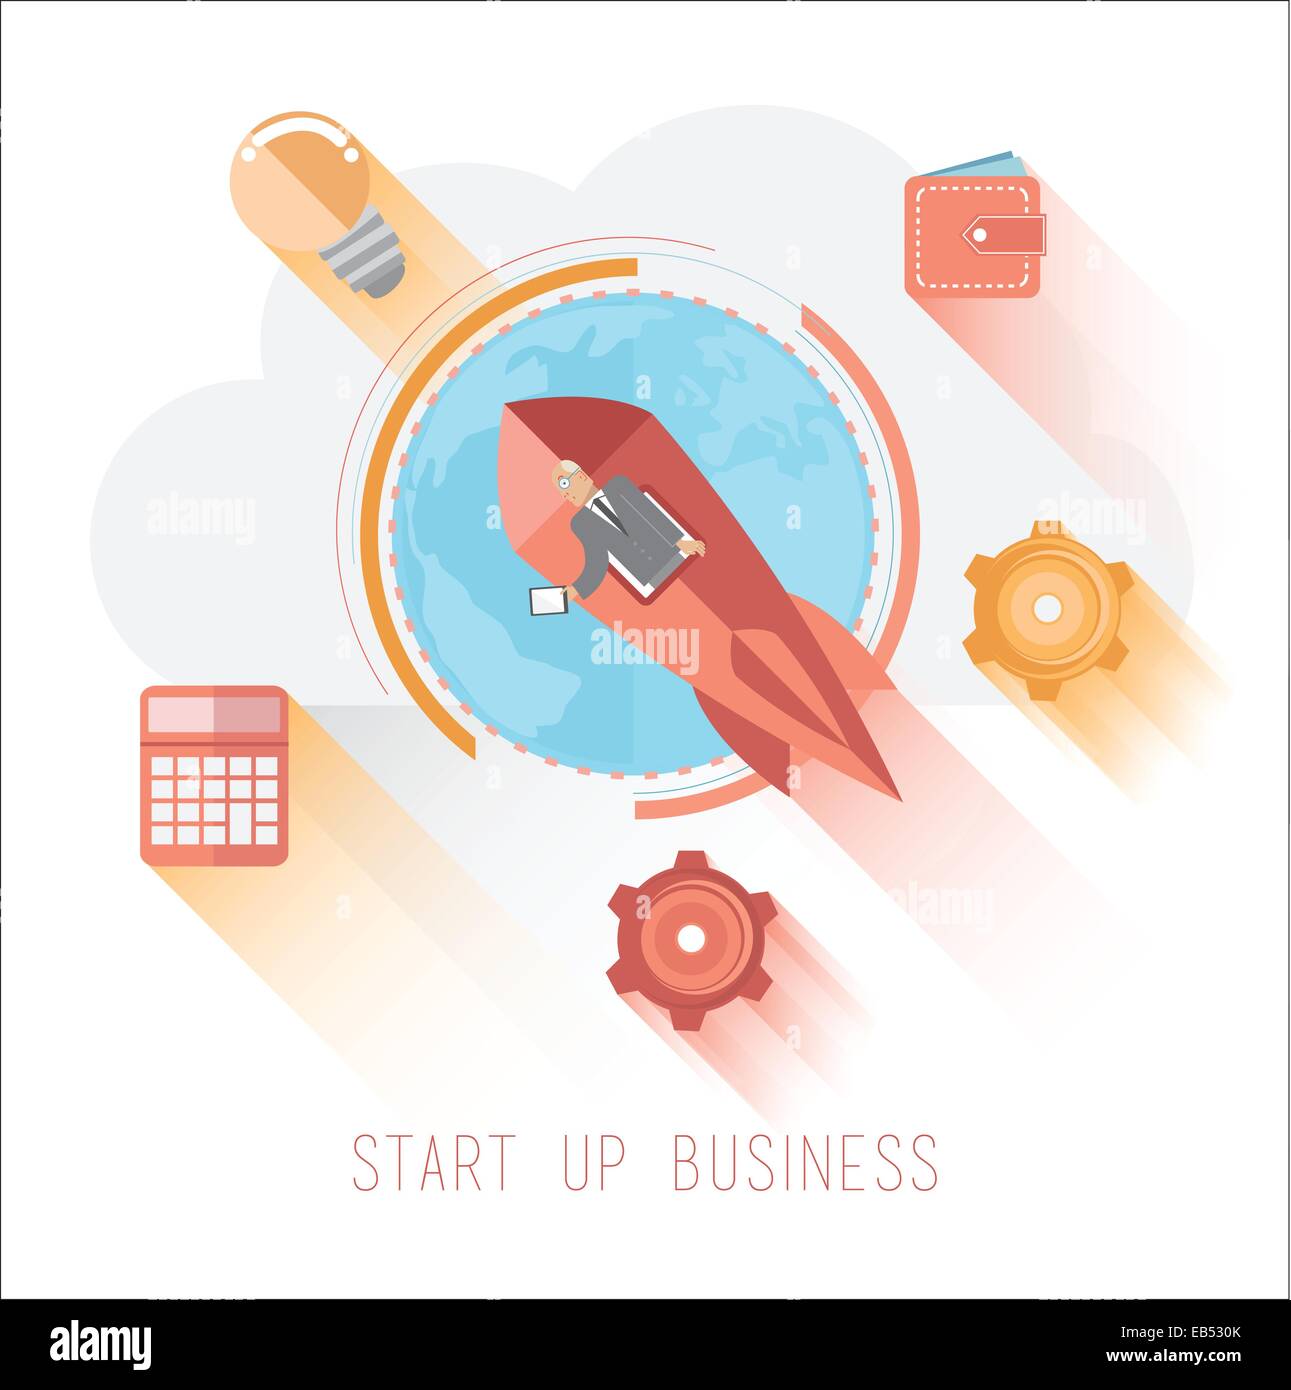 Start up business graphic with icons Stock Vector